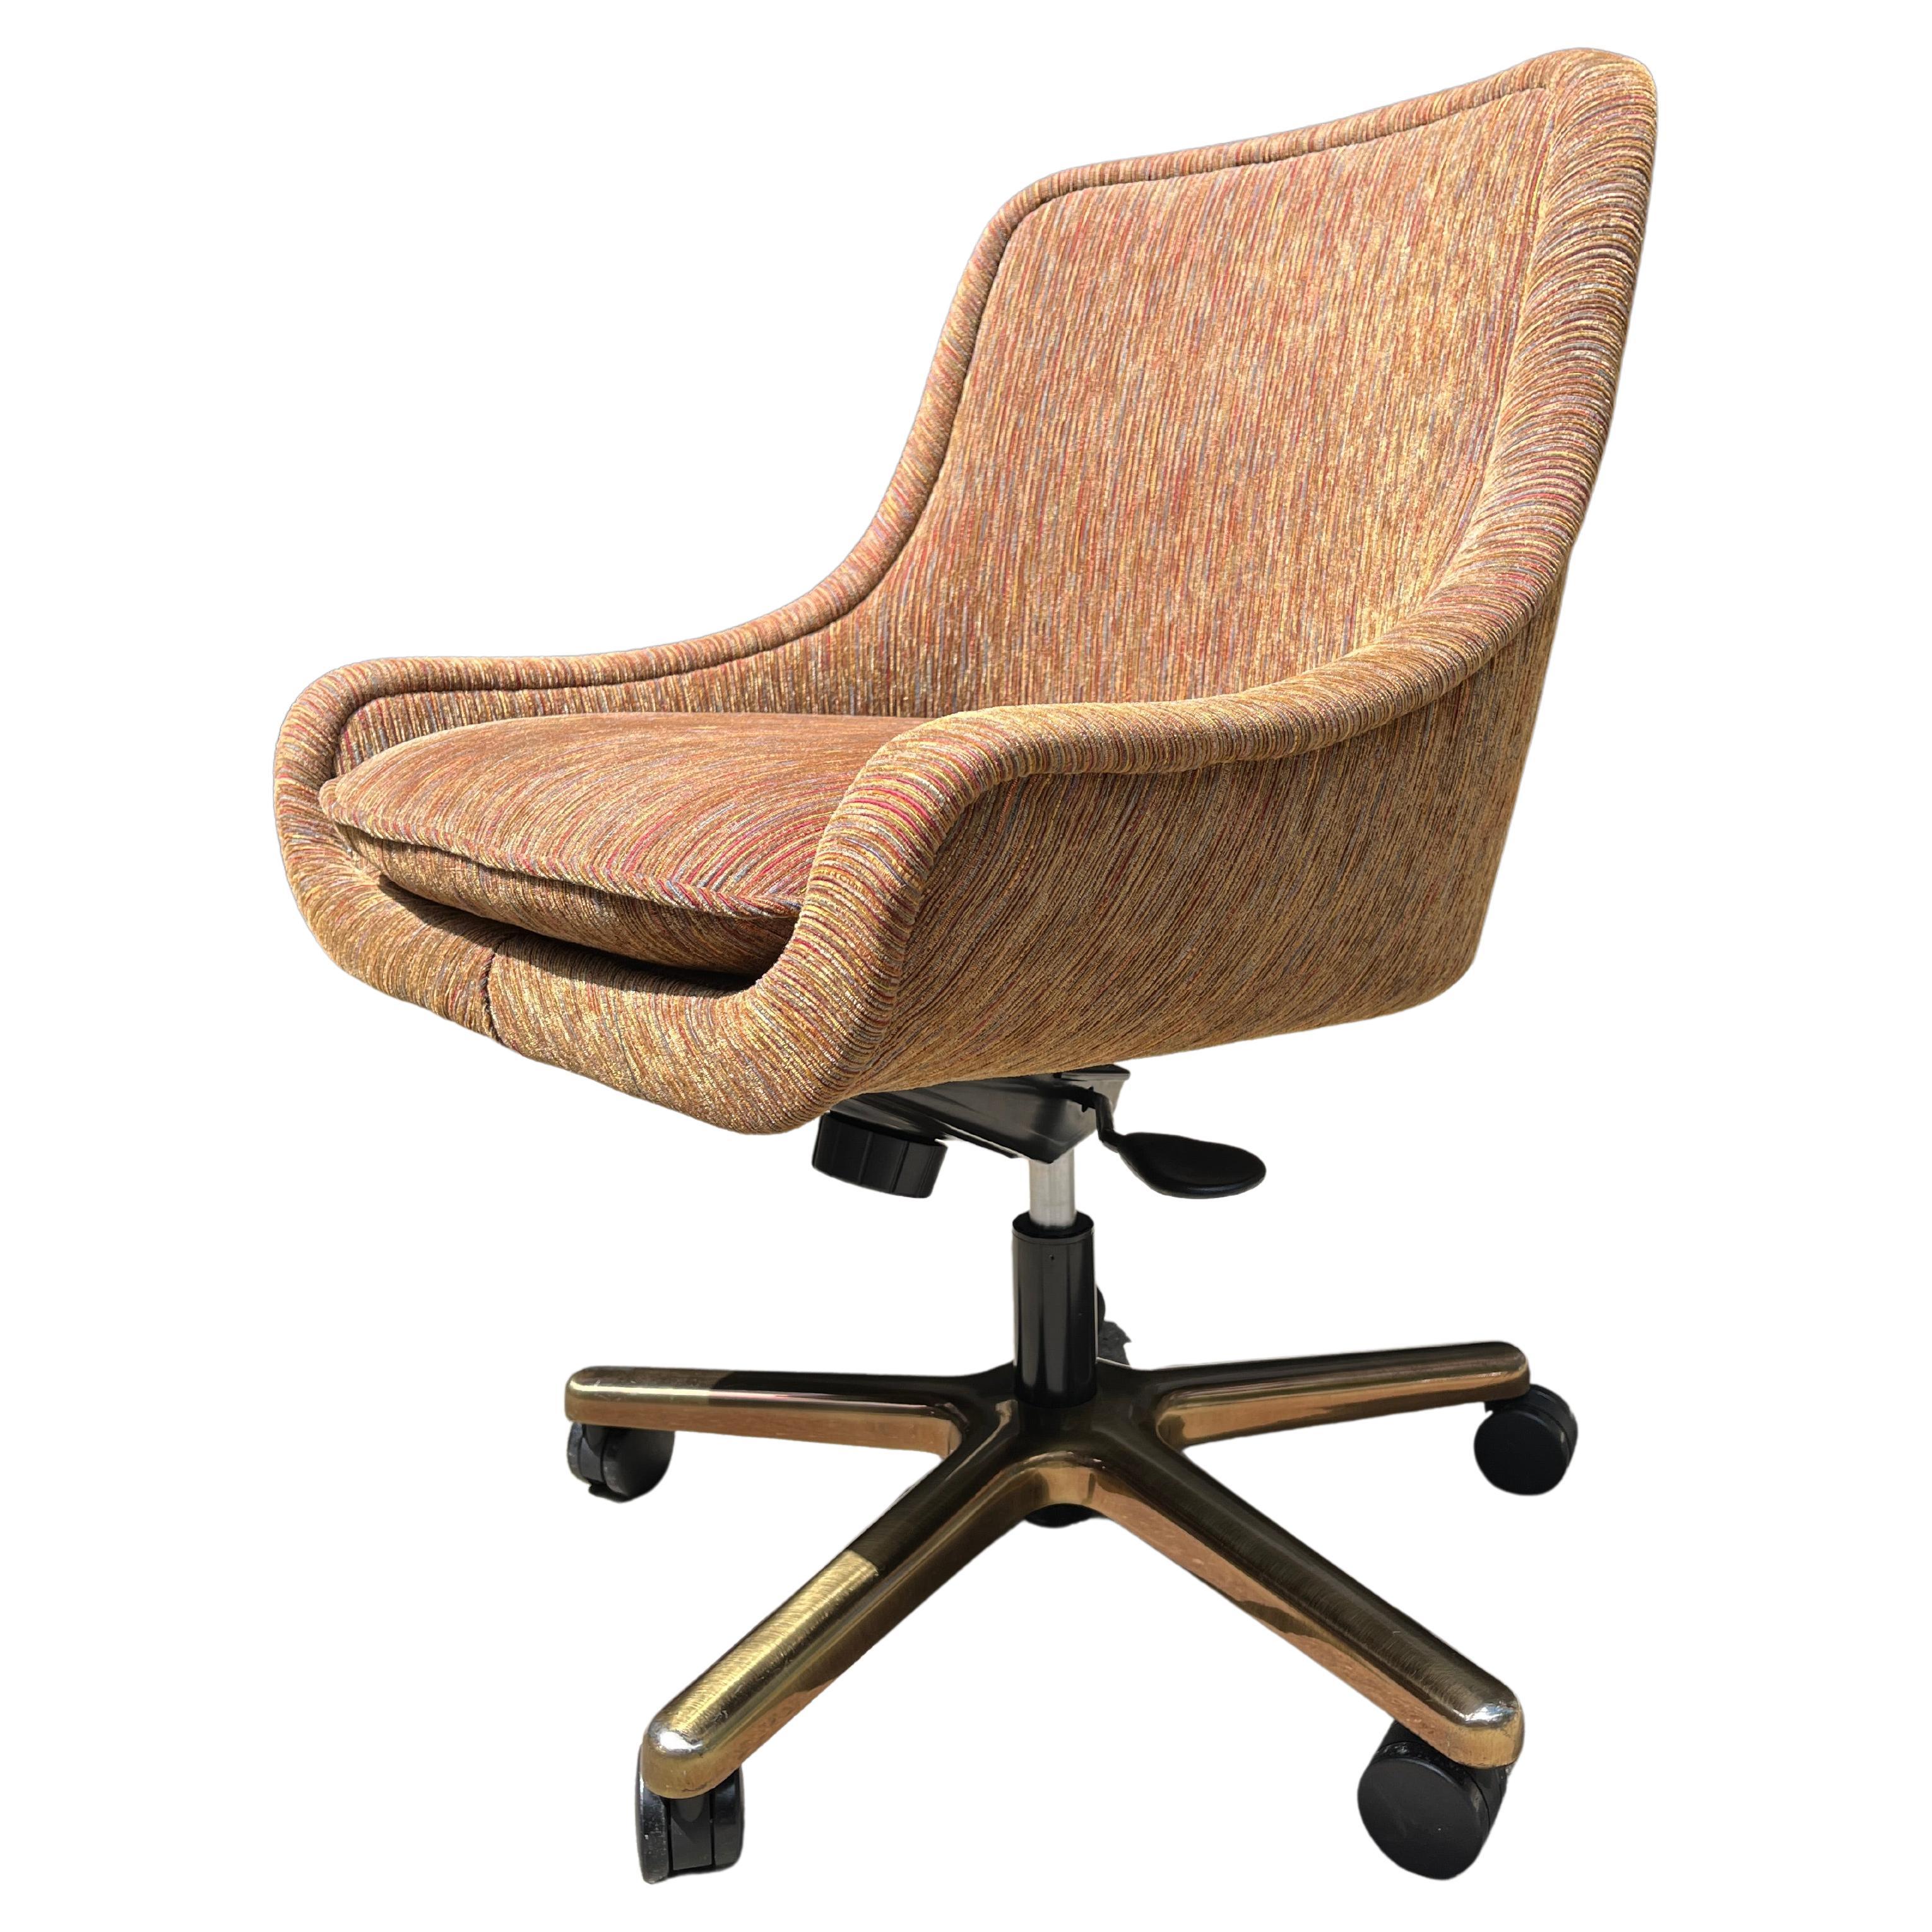 American Naoto Fukasawa Office Swivel Chairs Geiger for Herman Miller